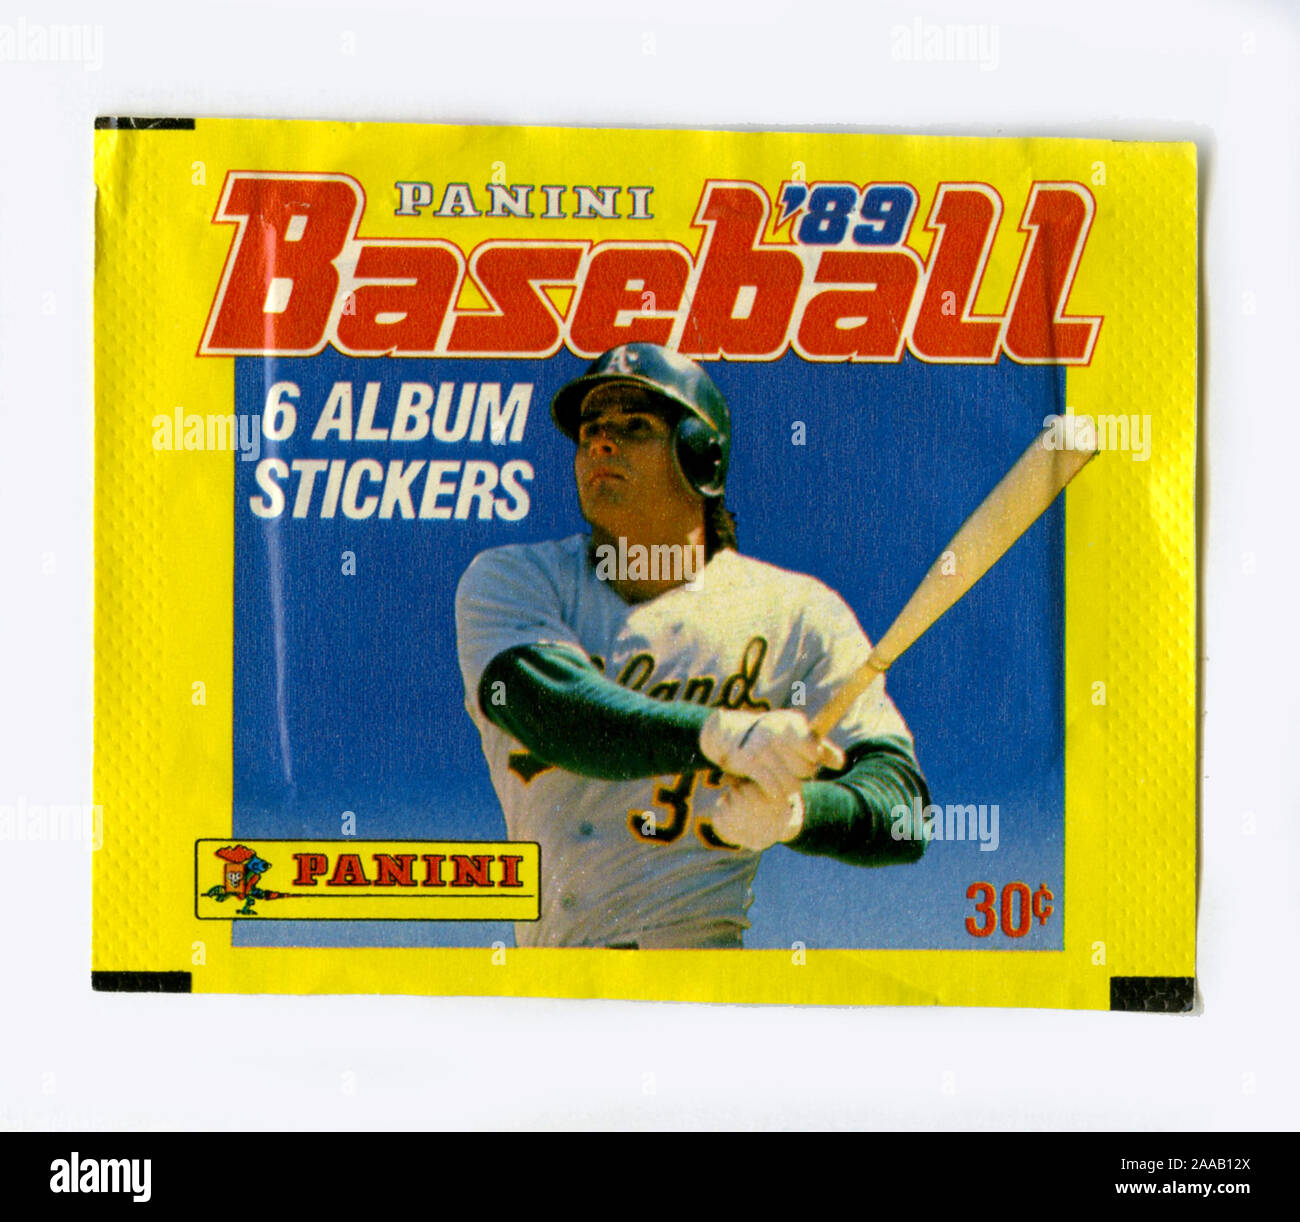 A package of collectible Panini brand baseball stickers from 1989 featuring Oakland A's slugger Jose Conseco on the wrapper cover. Canseco was later known to have been using steroids to improve his performance along with other athletes of the period. Stock Photo